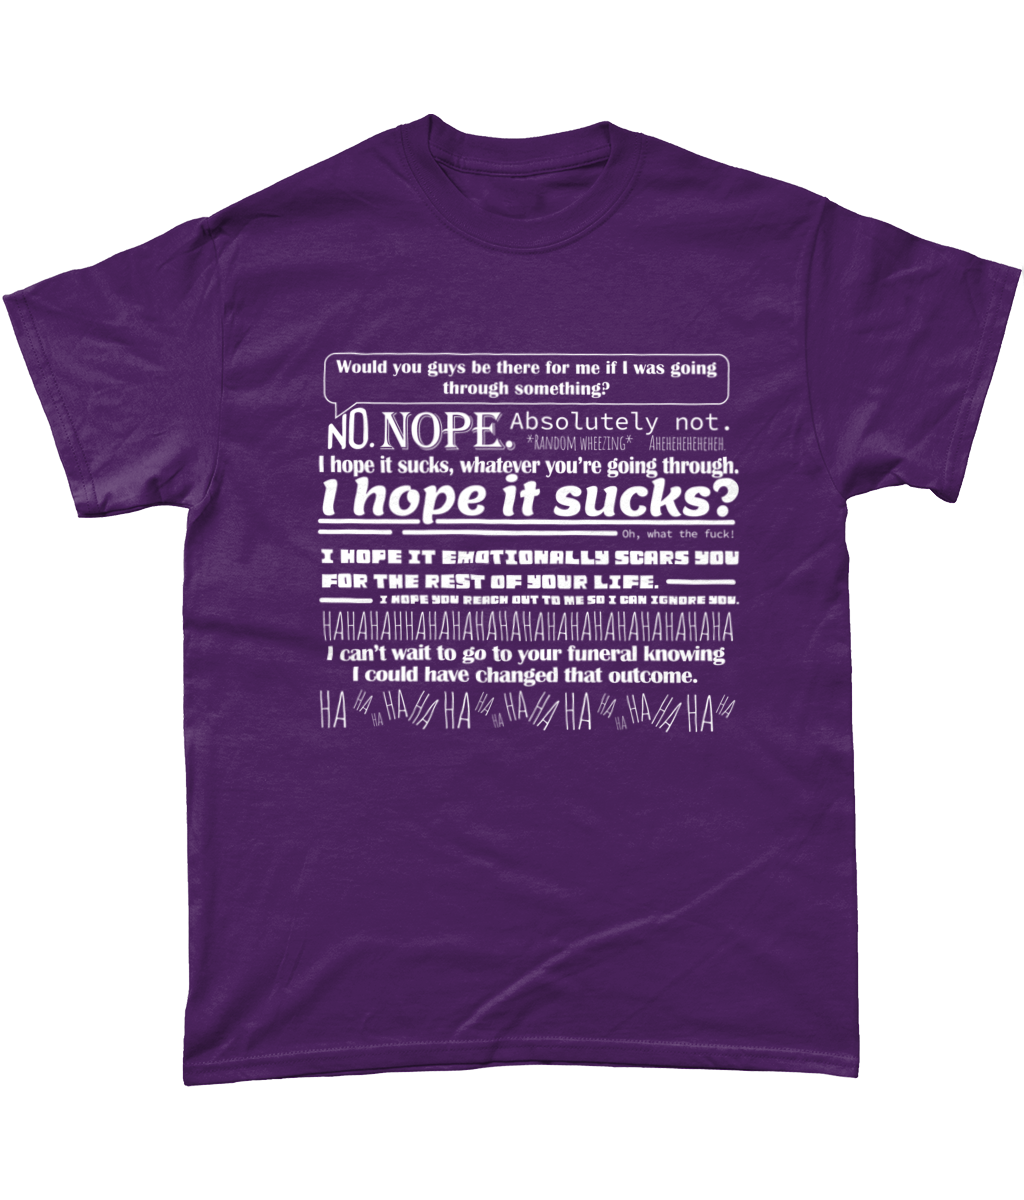 Would You Guys be There for me if I Was Going Through Something T Shirt